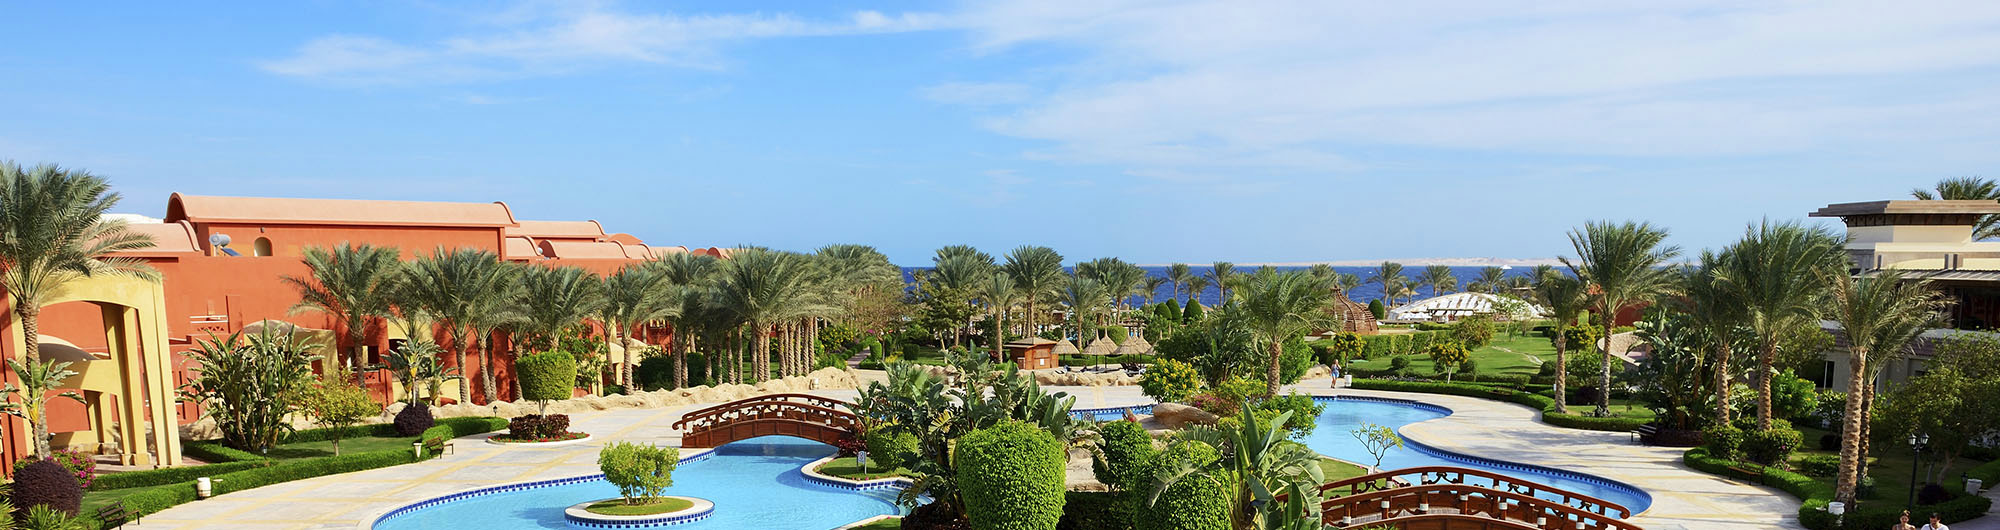 Search and compare cheap flights from Kuwait City to Sharm El Sheikh international airport